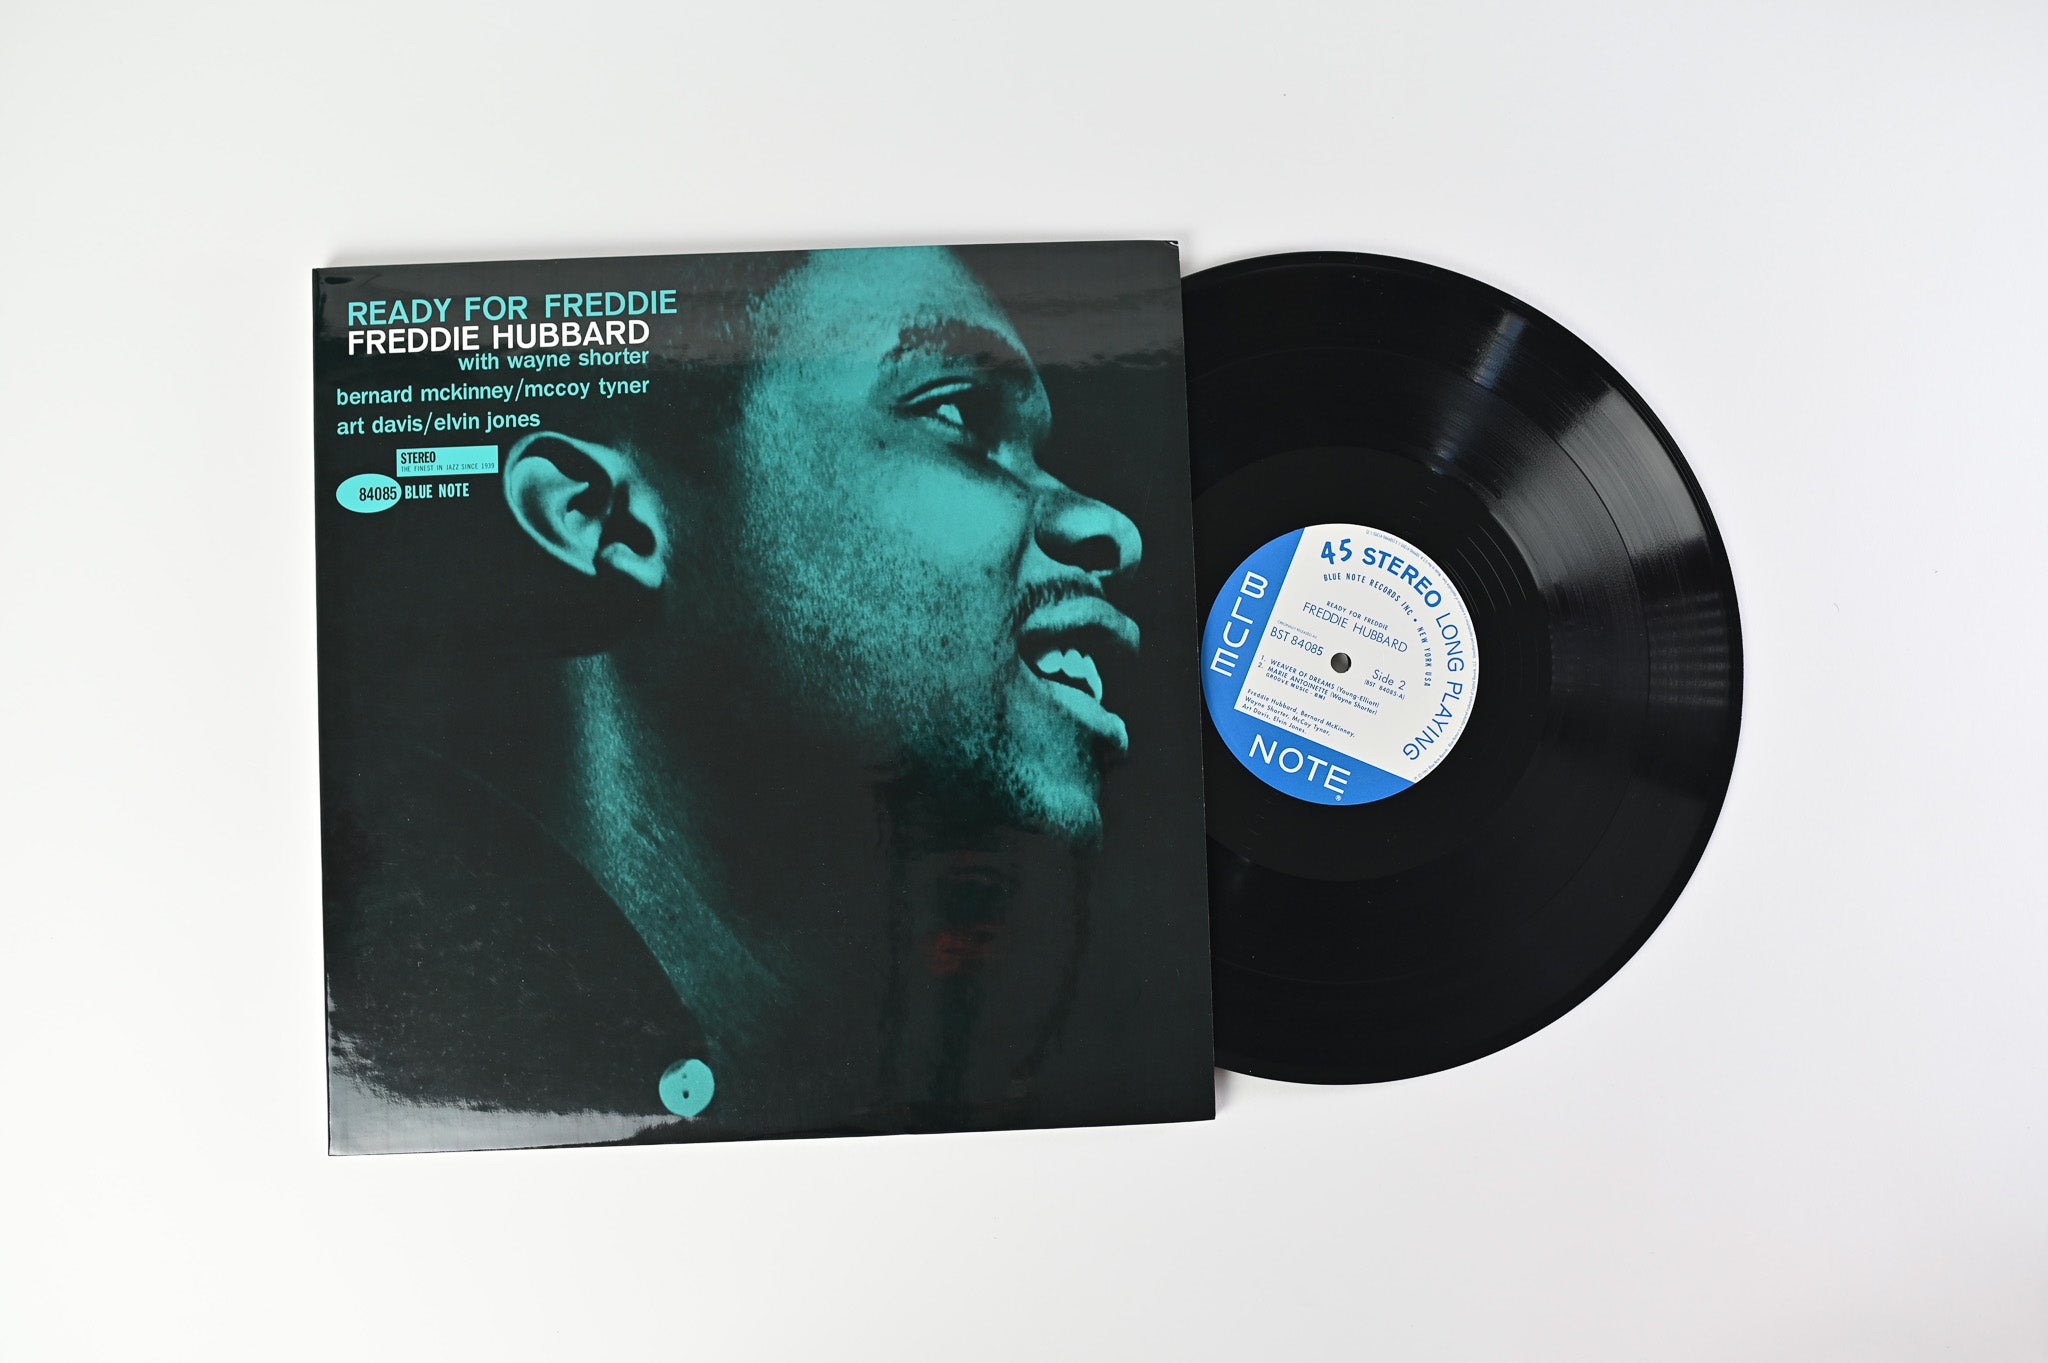 Freddie Hubbard - Ready For Freddie on Blue Note Music Matters Ltd Numbered Reissue 45 RPM